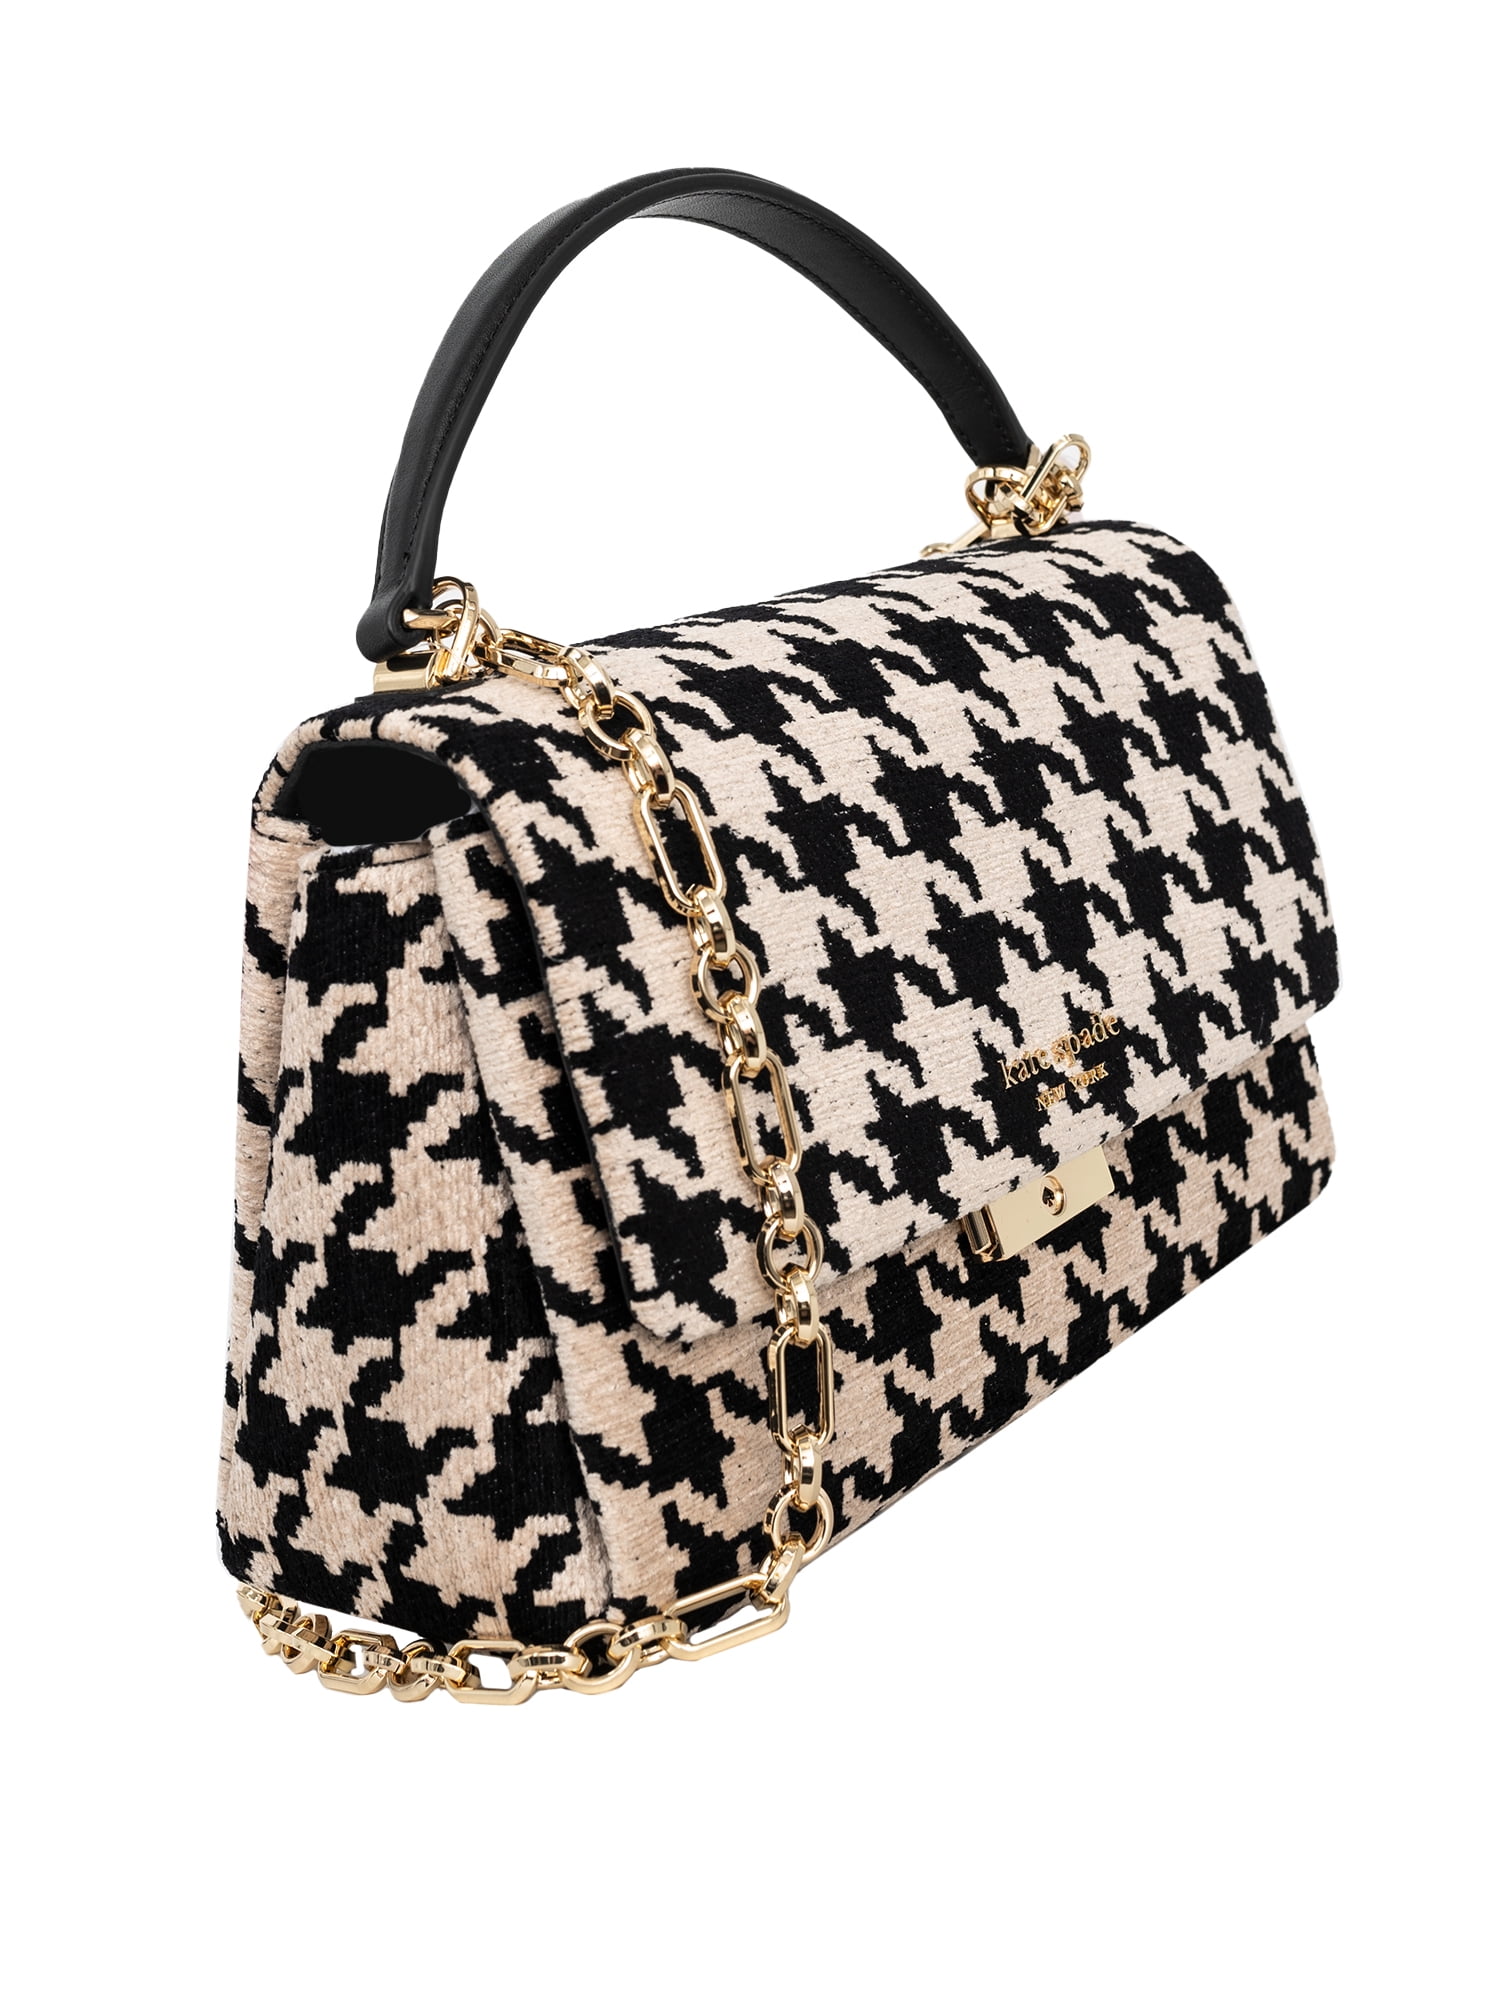 Kate Spade Black and White Houndstooth Purse